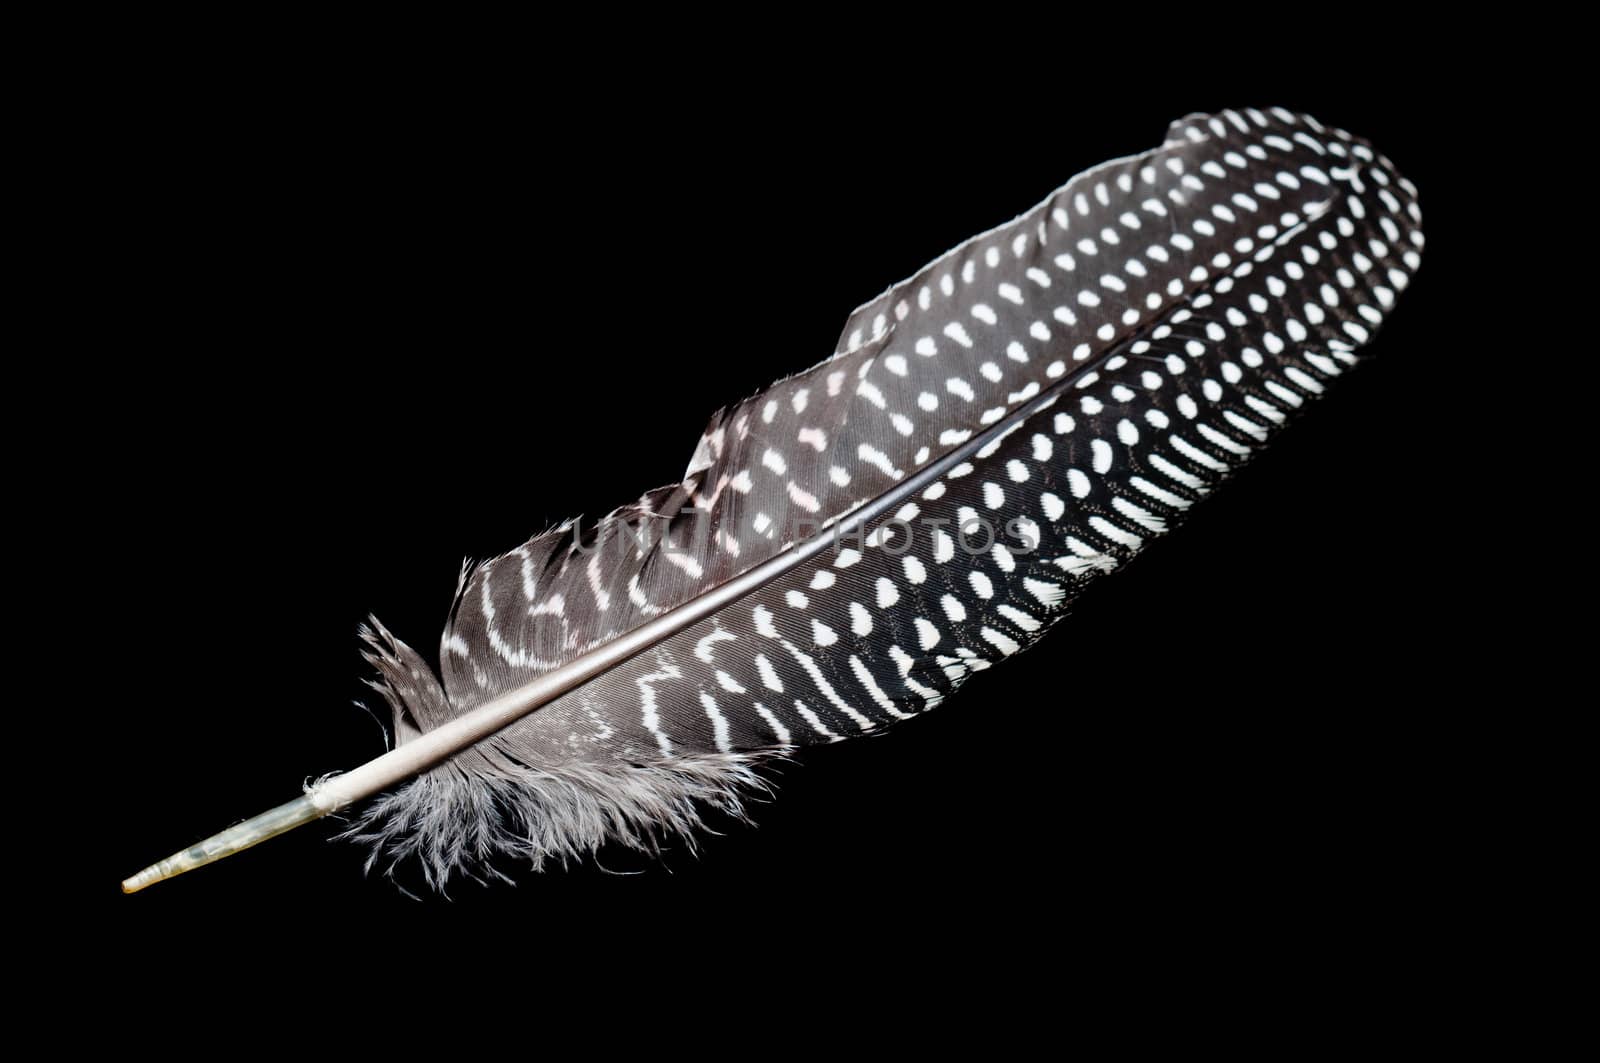 Spotted black and white feather on a black background